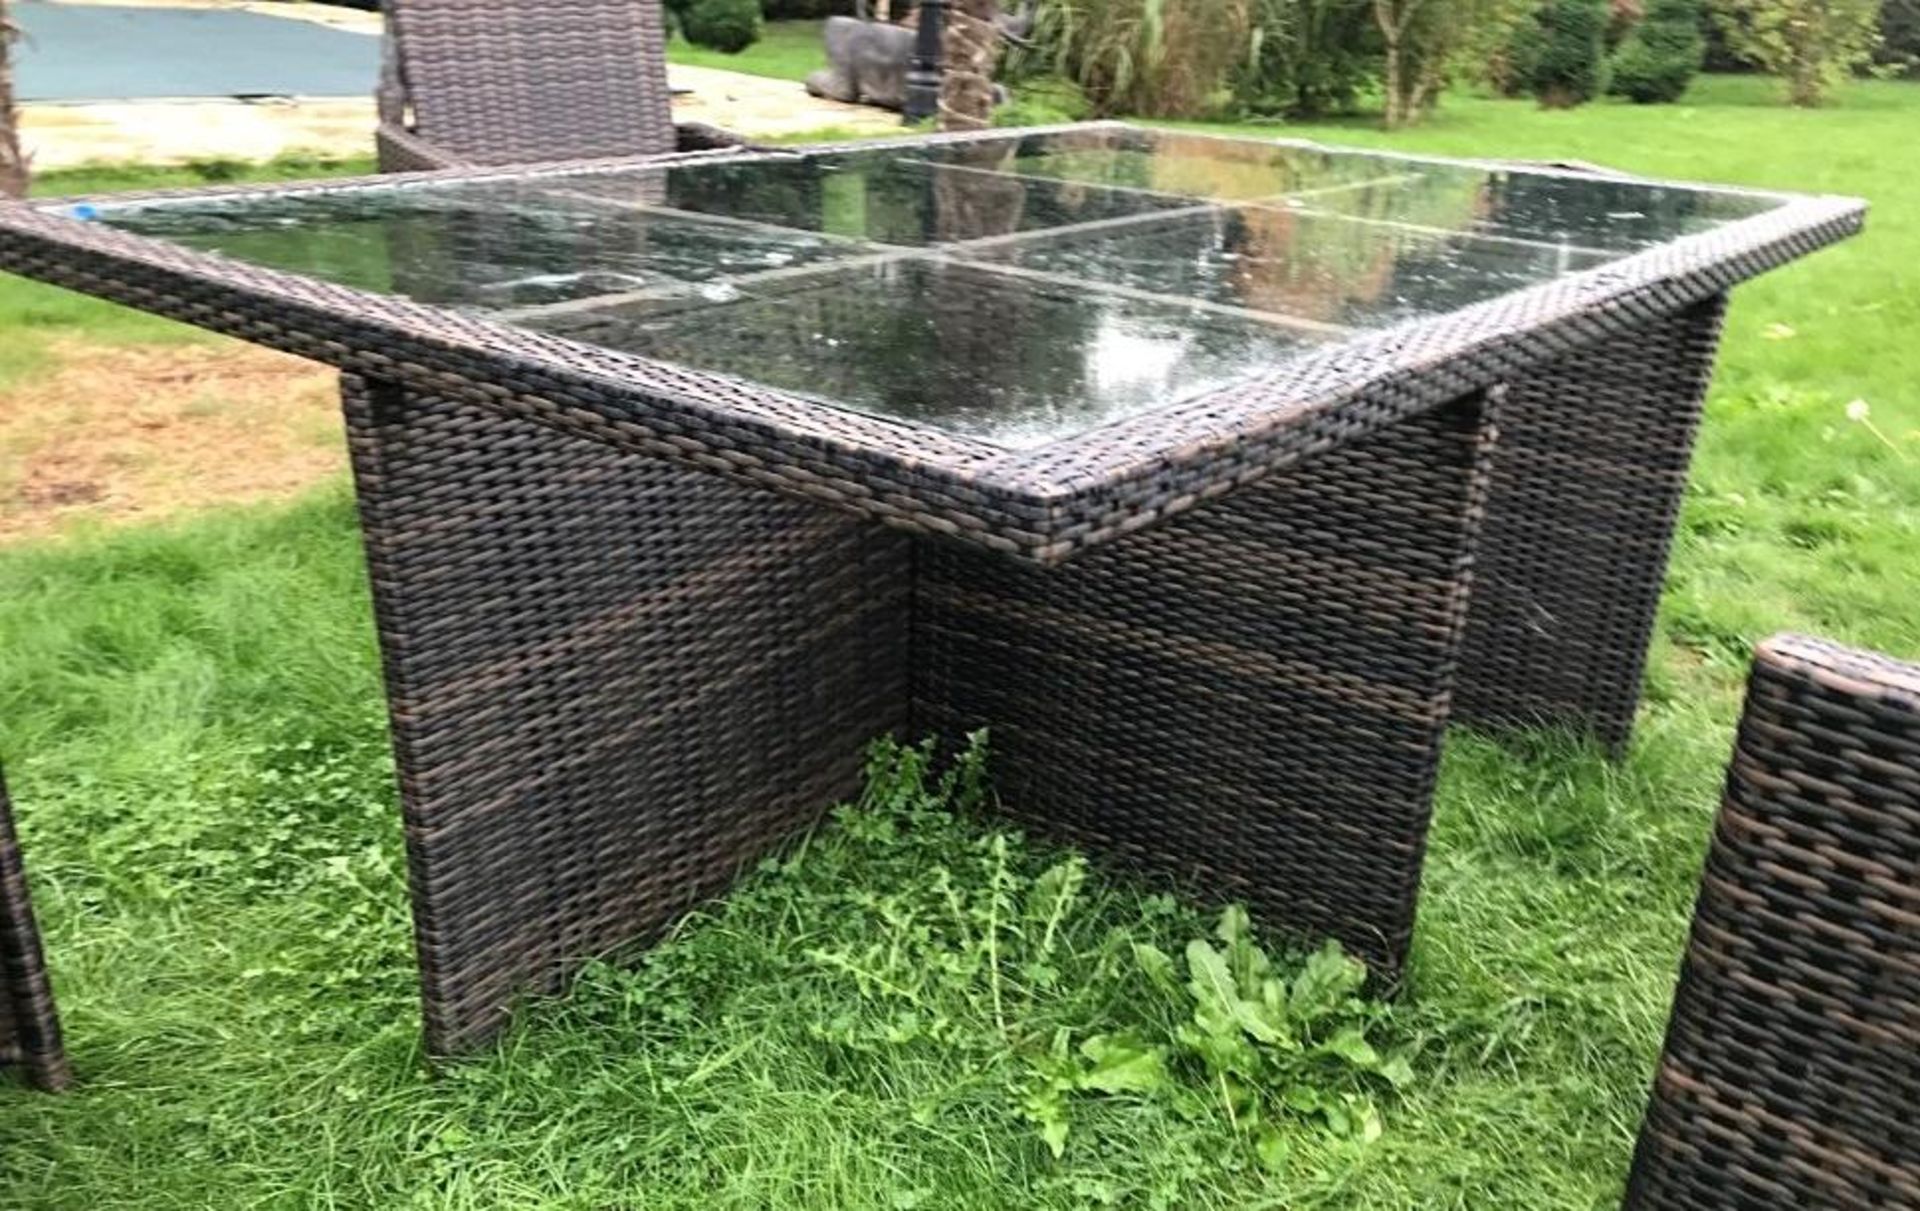 1 x Large Wicker / Rattan Outdoor Dining Table Set With Insert Glass Top And 6 Matching Dining - Image 9 of 11